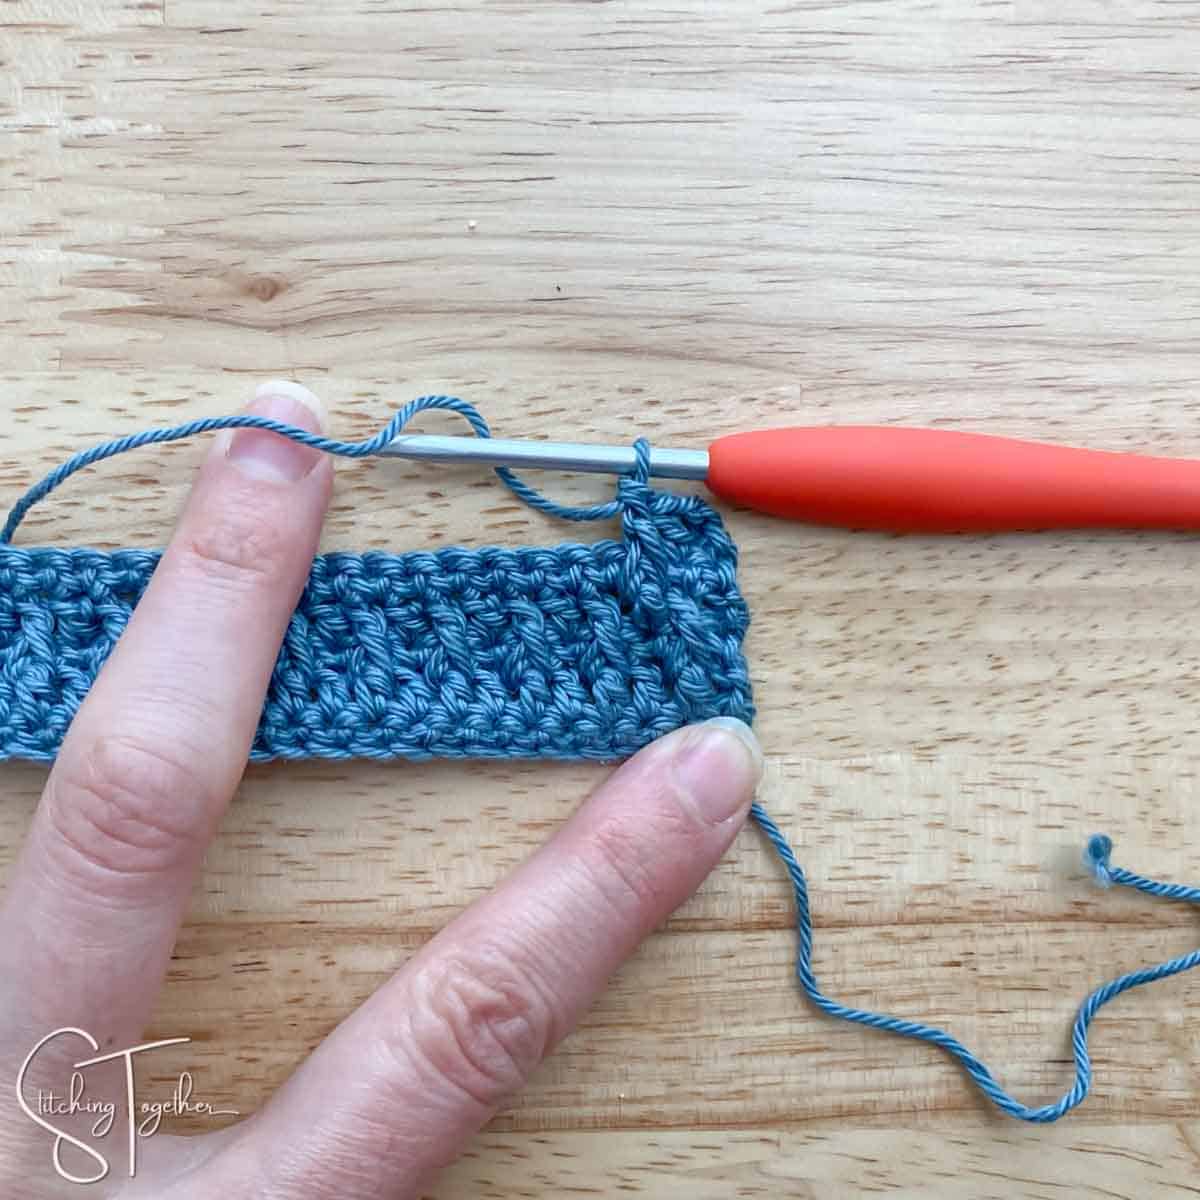 first completed post stitch of row 6 for the Alpine crochet stitch